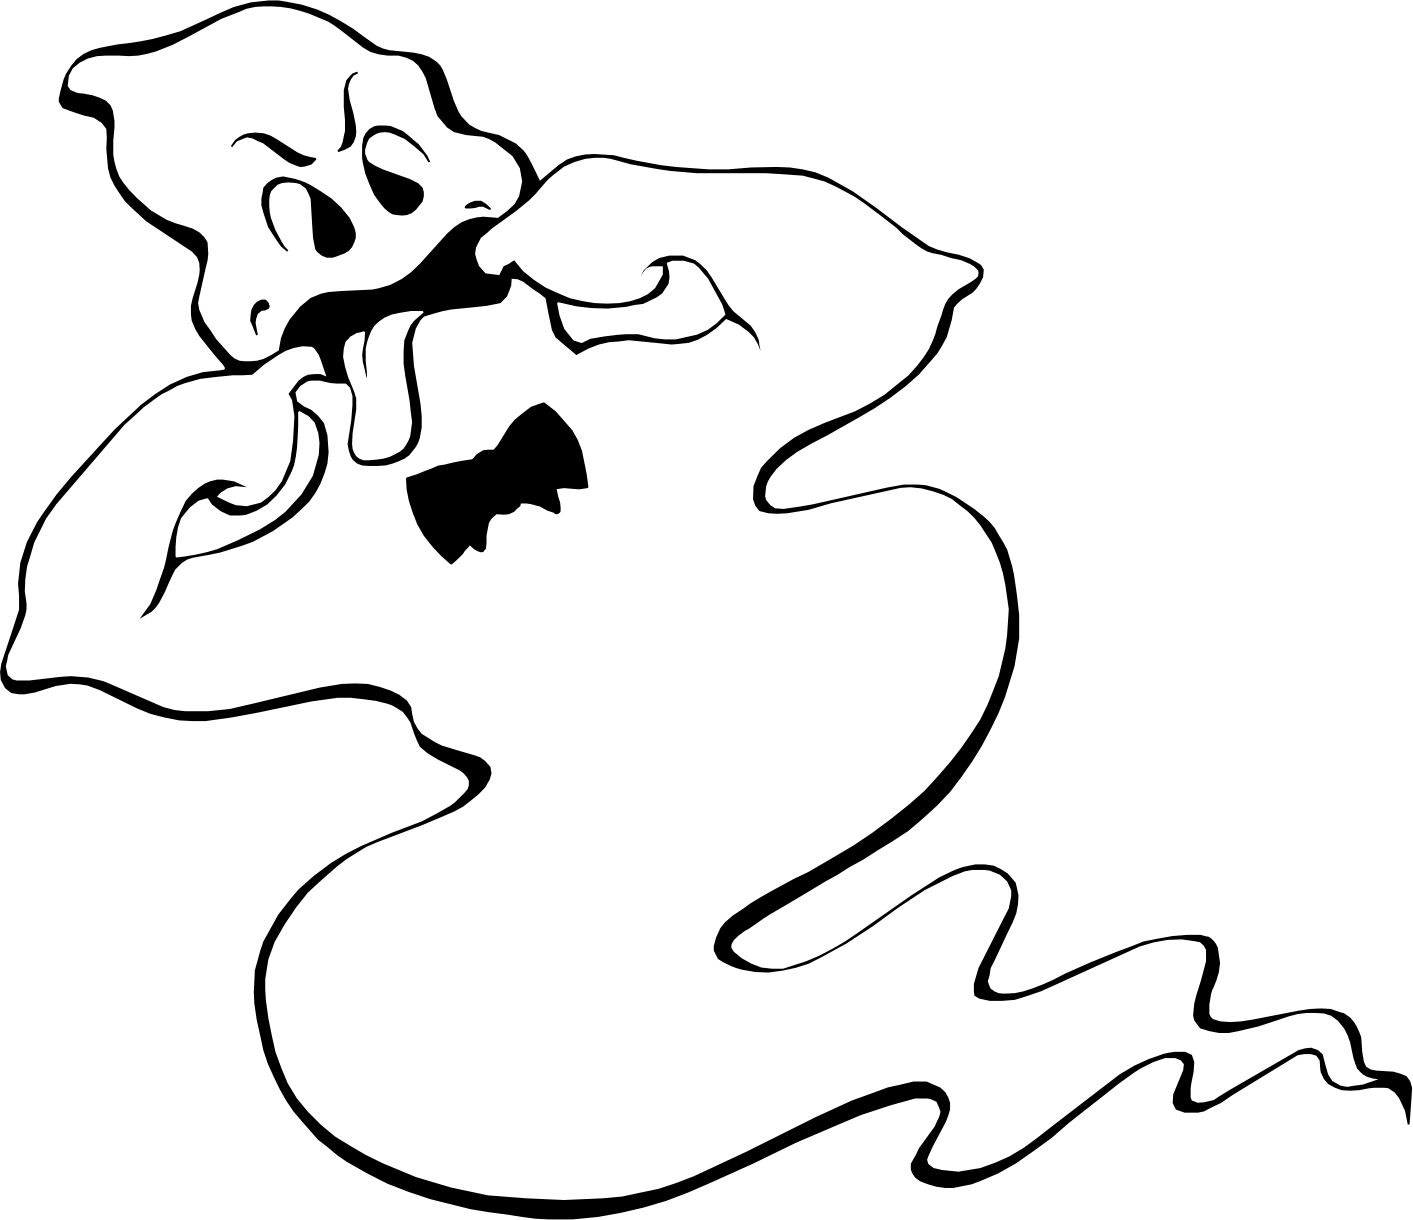 Pictures Of Cartoon Ghosts - ClipArt Best